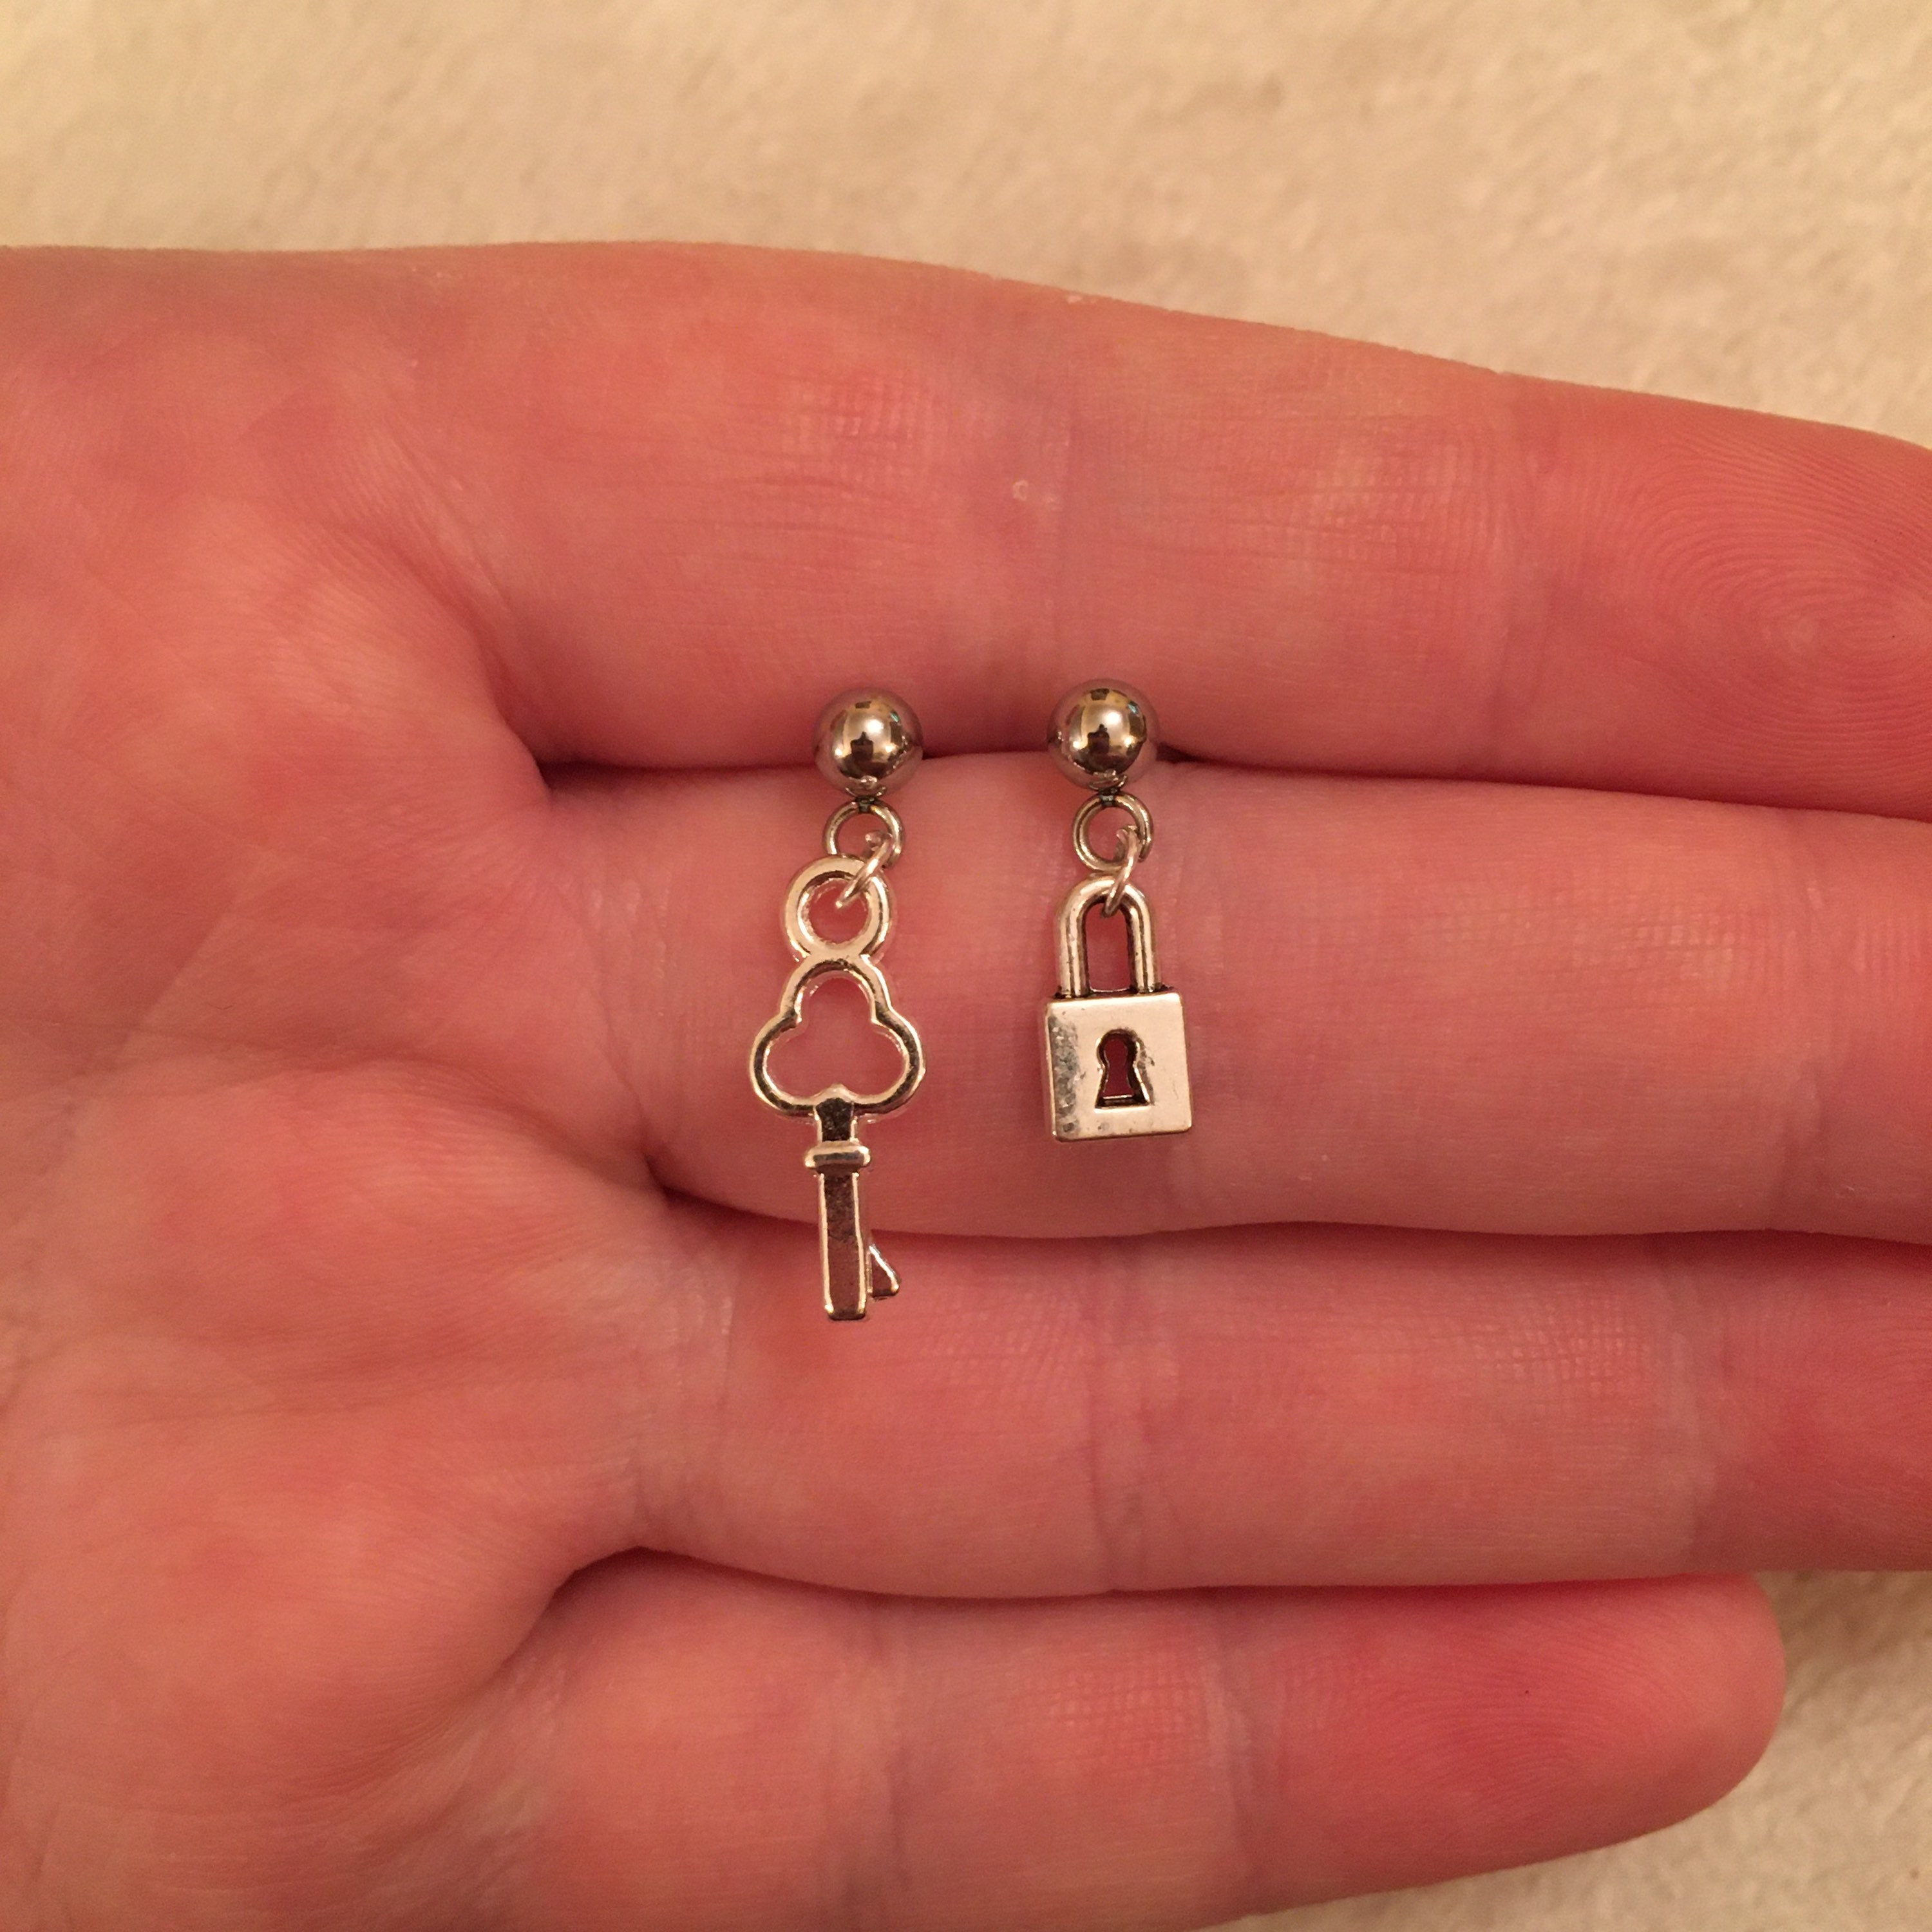 Buy Silver Dangle/ Drop Earrings With Silver Lock and Key Charms, Lock  Earrings, Key Earrings, Secret Santa Gift, Stocking Filler Online in India  - Etsy